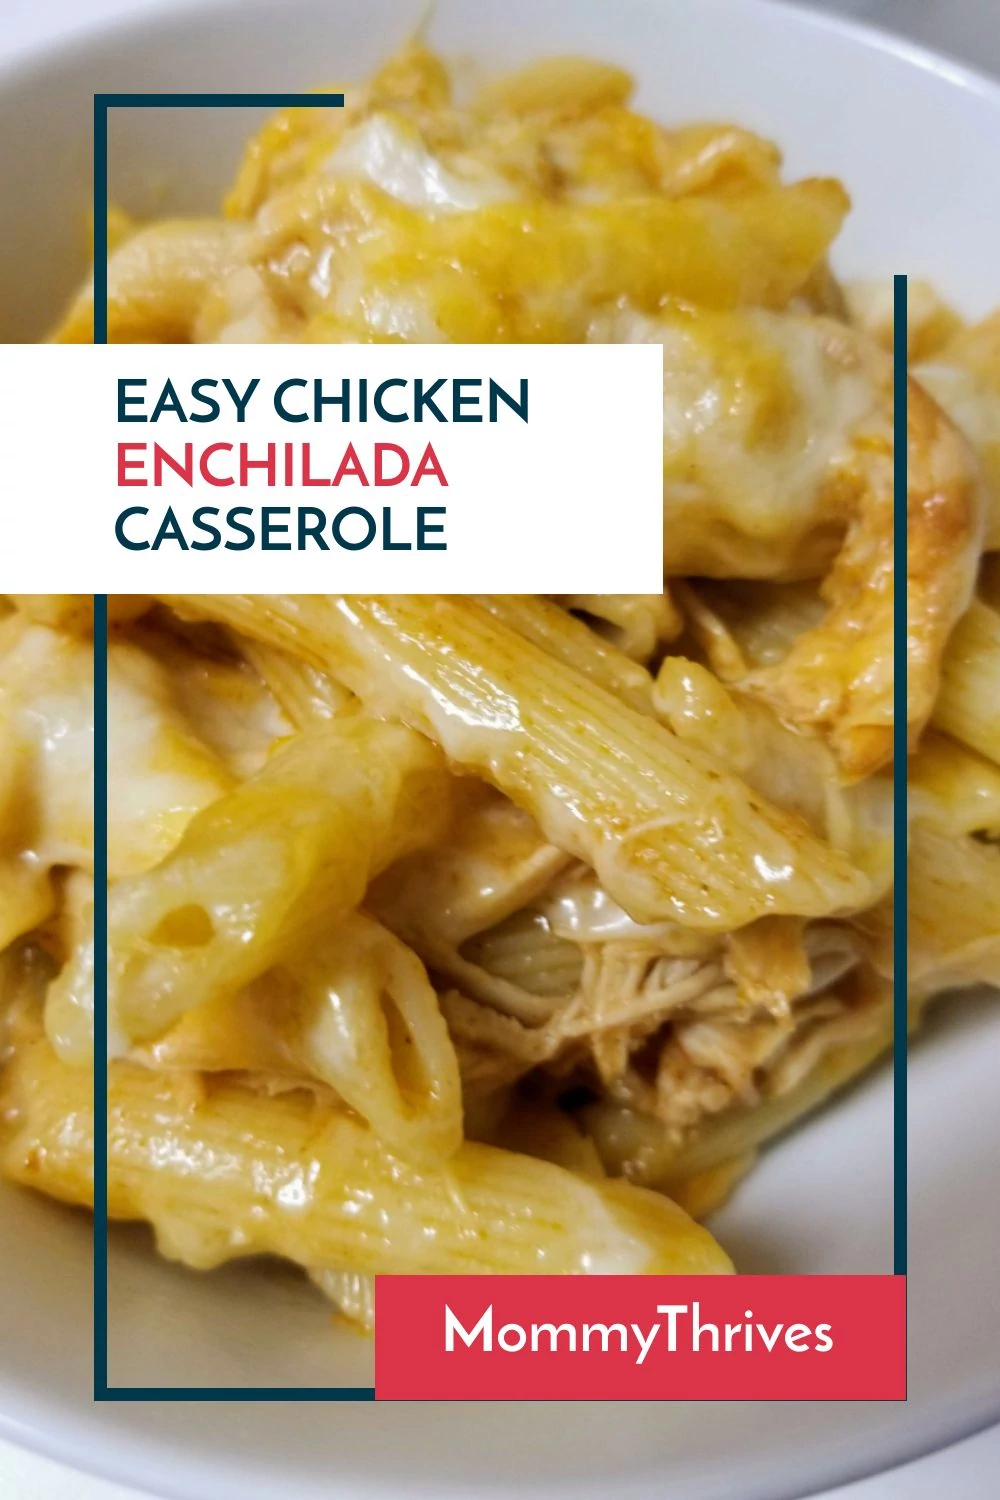 https://www.mommythrives.com/wp-content/uploads/2022/01/Delicious-Chicken-Enchilada-Casserole-with-Penne-Chicken-Enchilada-Casserole-Easy-Enchilada-Casserole-Dinner.webp